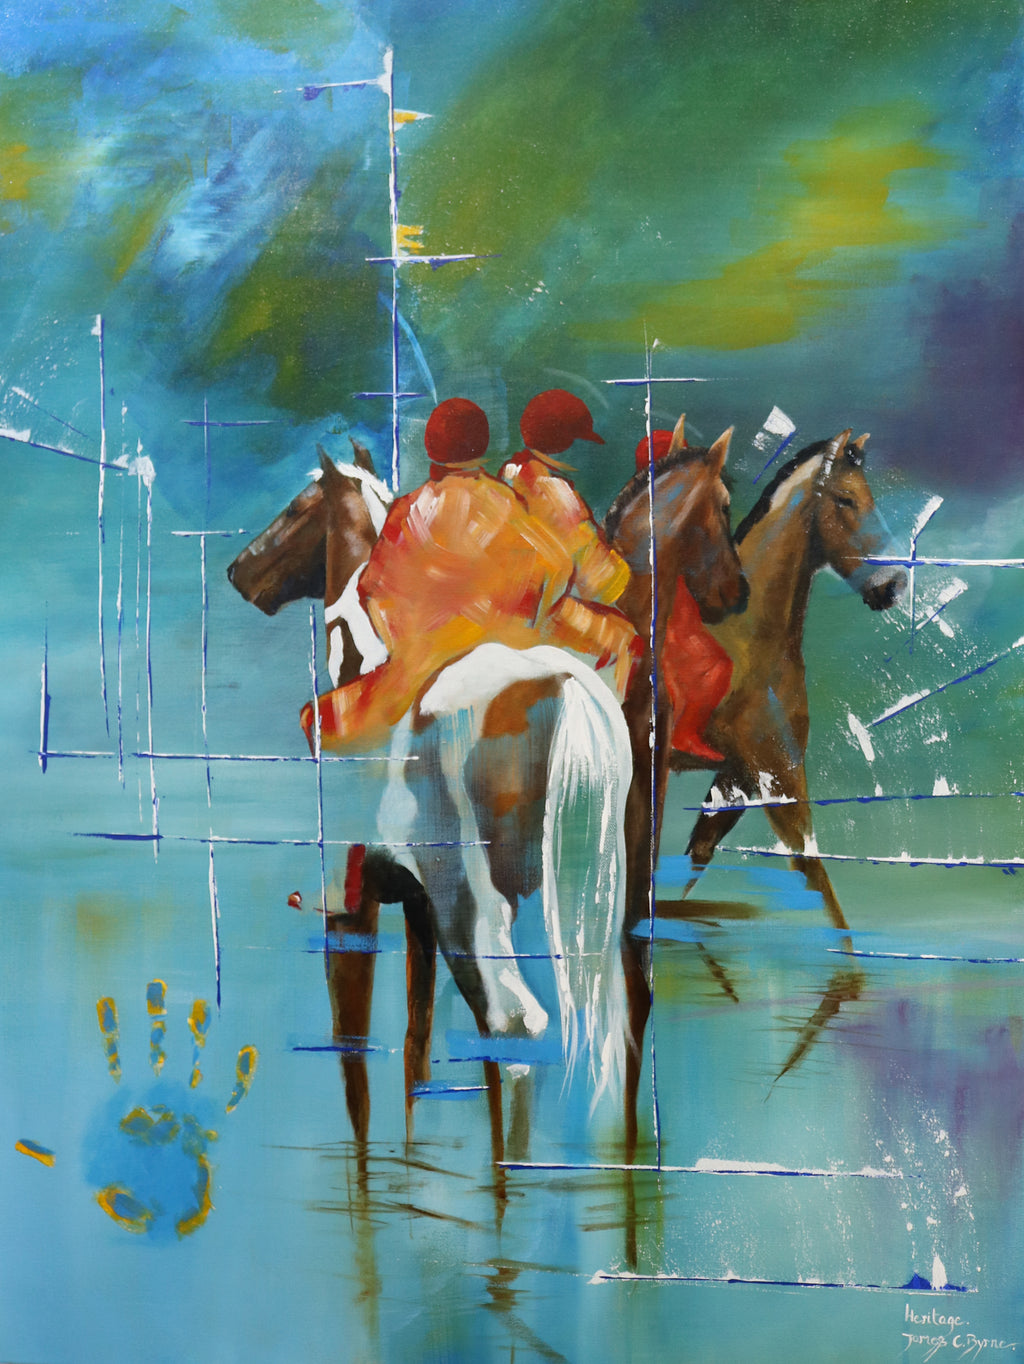 Bright vivid colours varying between blue turquoise, yellow and green, this is a great painting of horses with its riders by James C Byrne, part of Equine Essence exhibition in the Puffin Gallery, Ballycastle, Northern Ireland